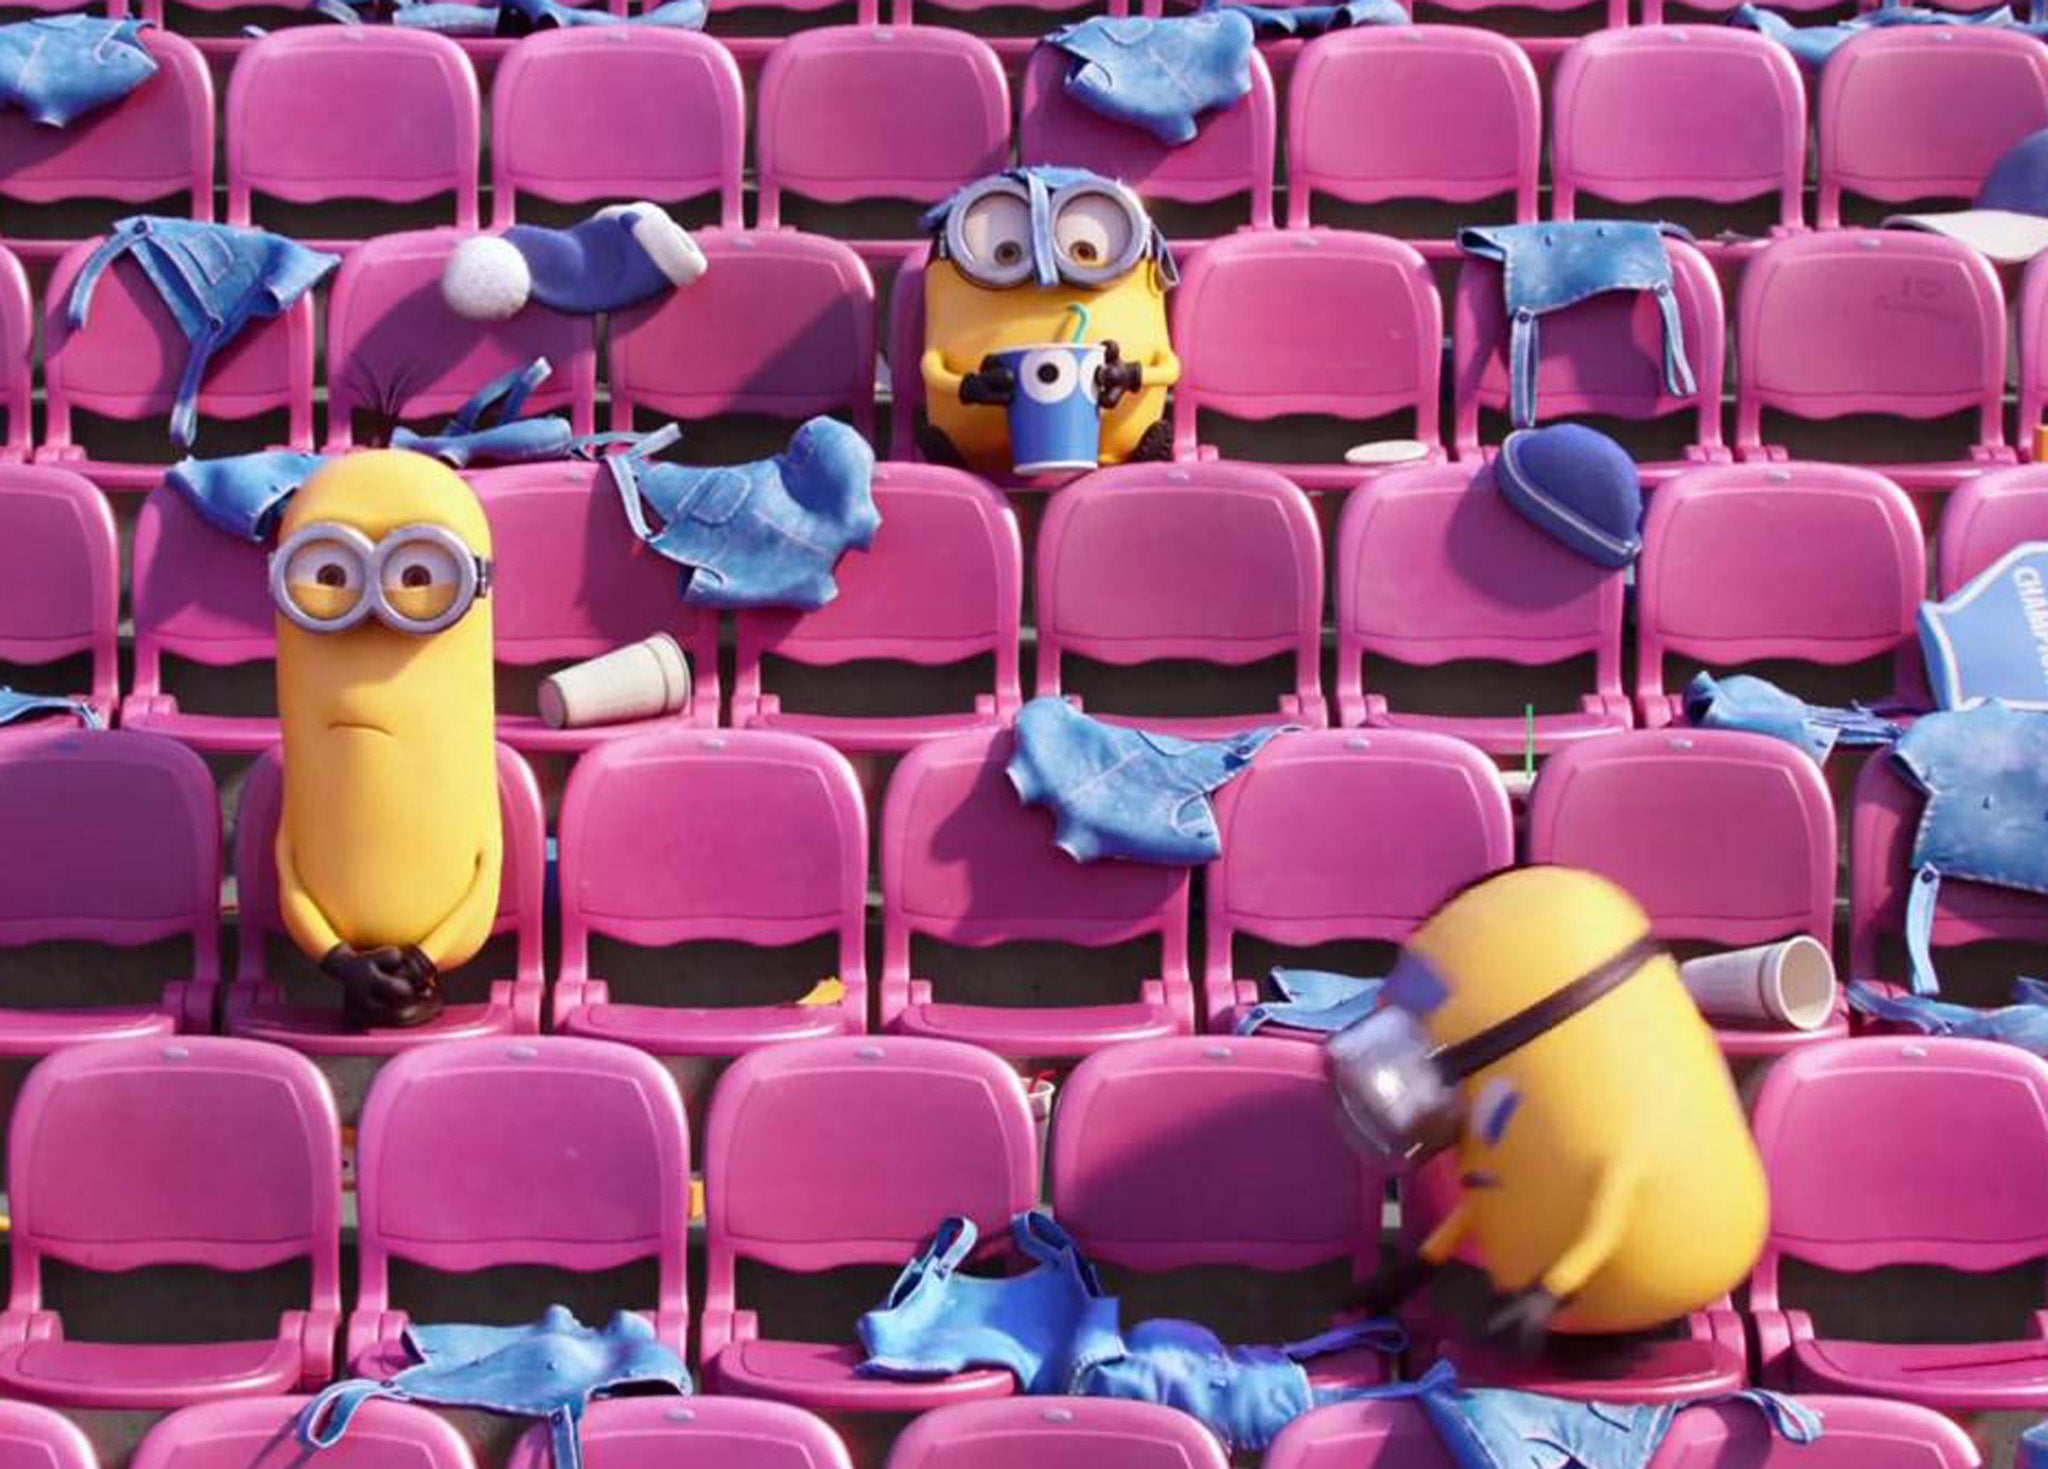 Minions blinded by Super Bowl fun somehow manage to lose their clothes